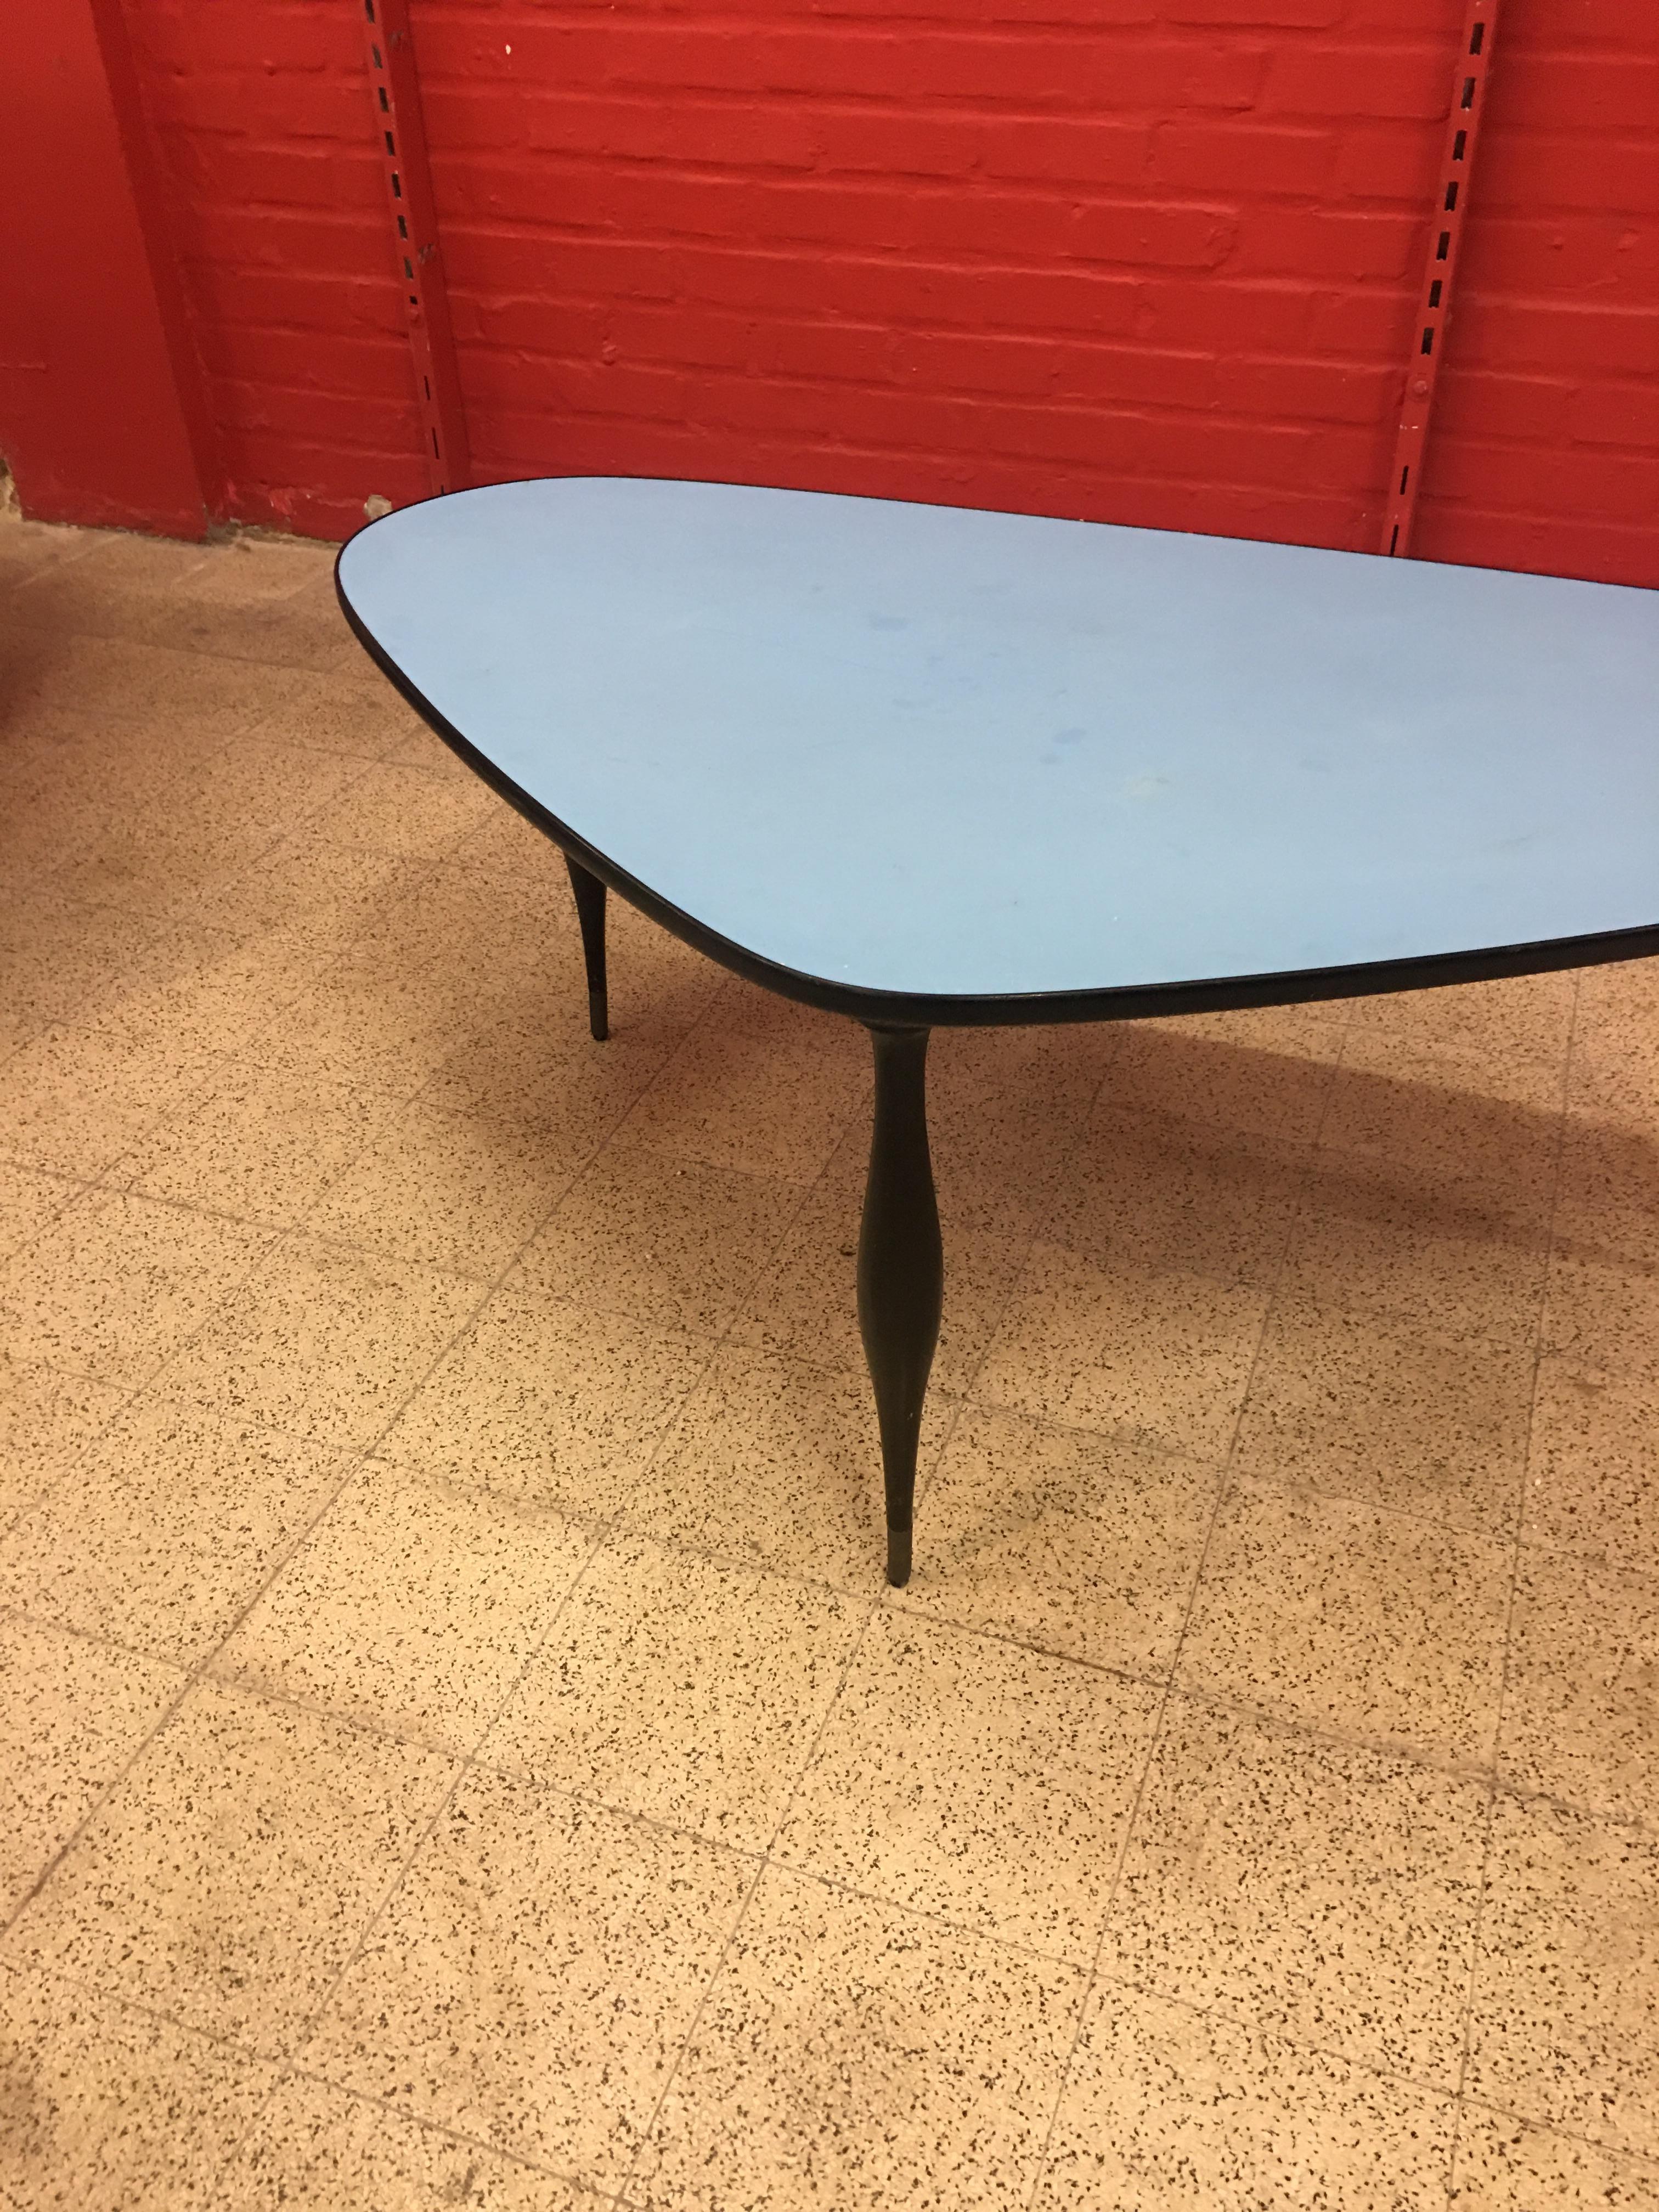 Original Freeform Coffee Table, Top Covered with Laminate, circa 1960 For Sale 3